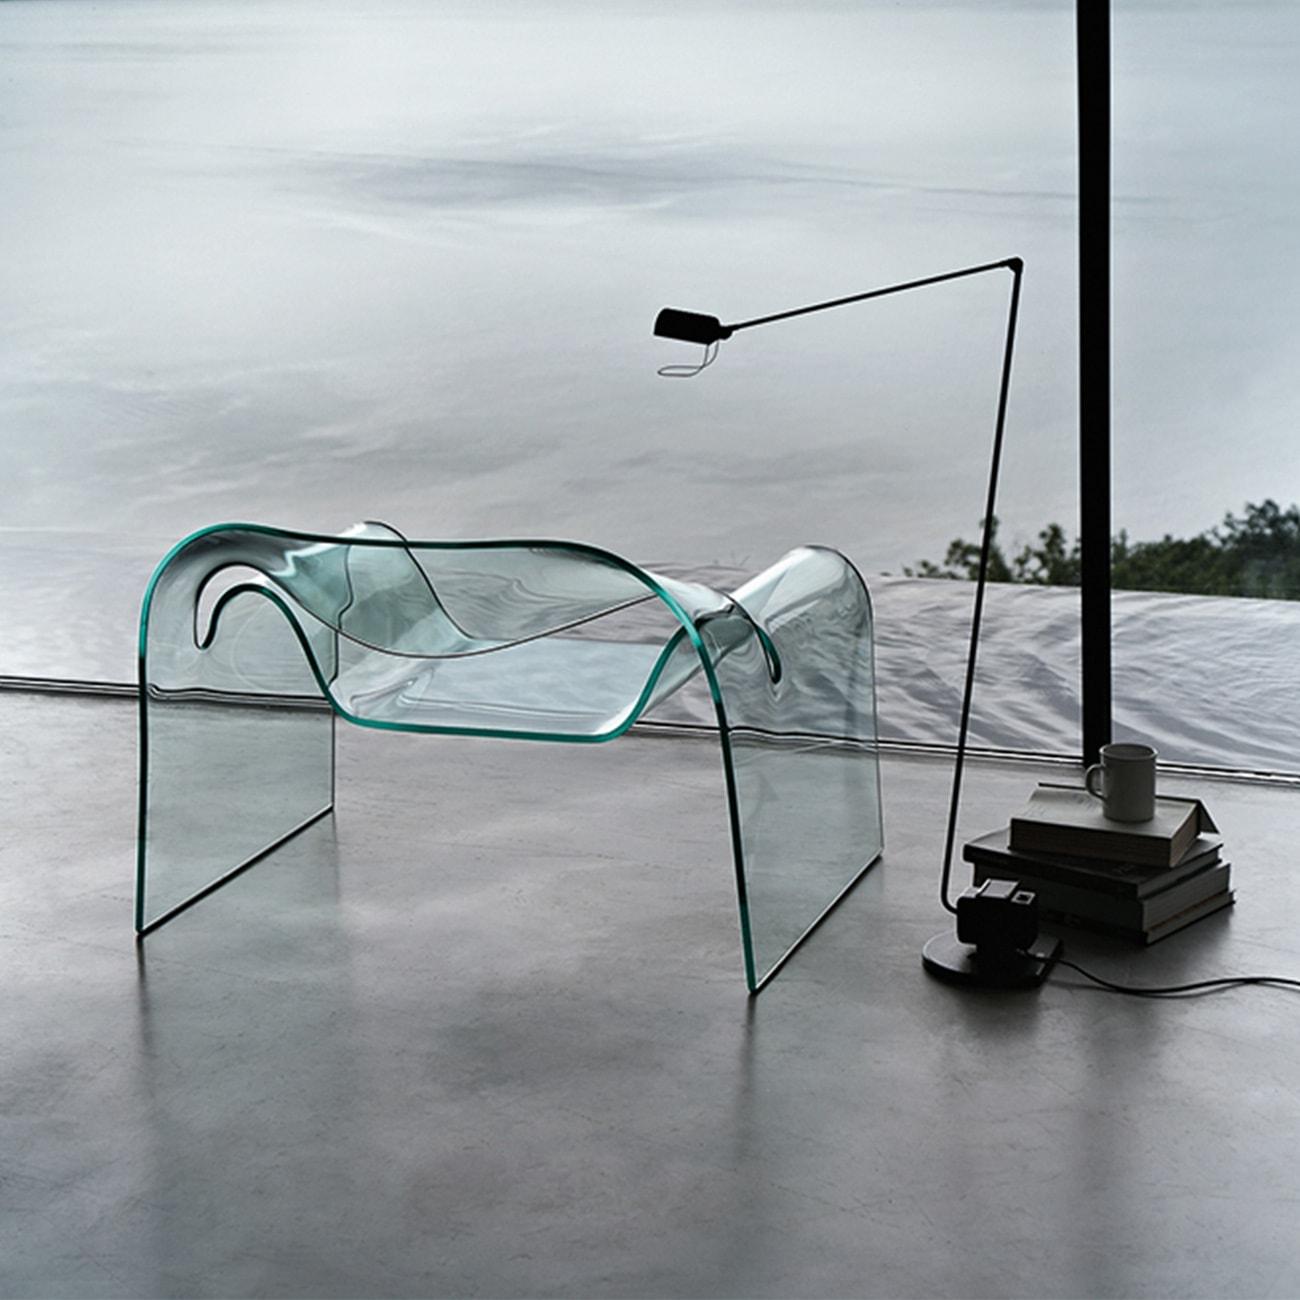 “A perfect synthesis of technological experimentation and formal research, the Ghost armchair, designed by Cini Boeri and Tomu Katayanagi, represents the desire to dematerialise the perception of function in favour of the user, who thus becomes the